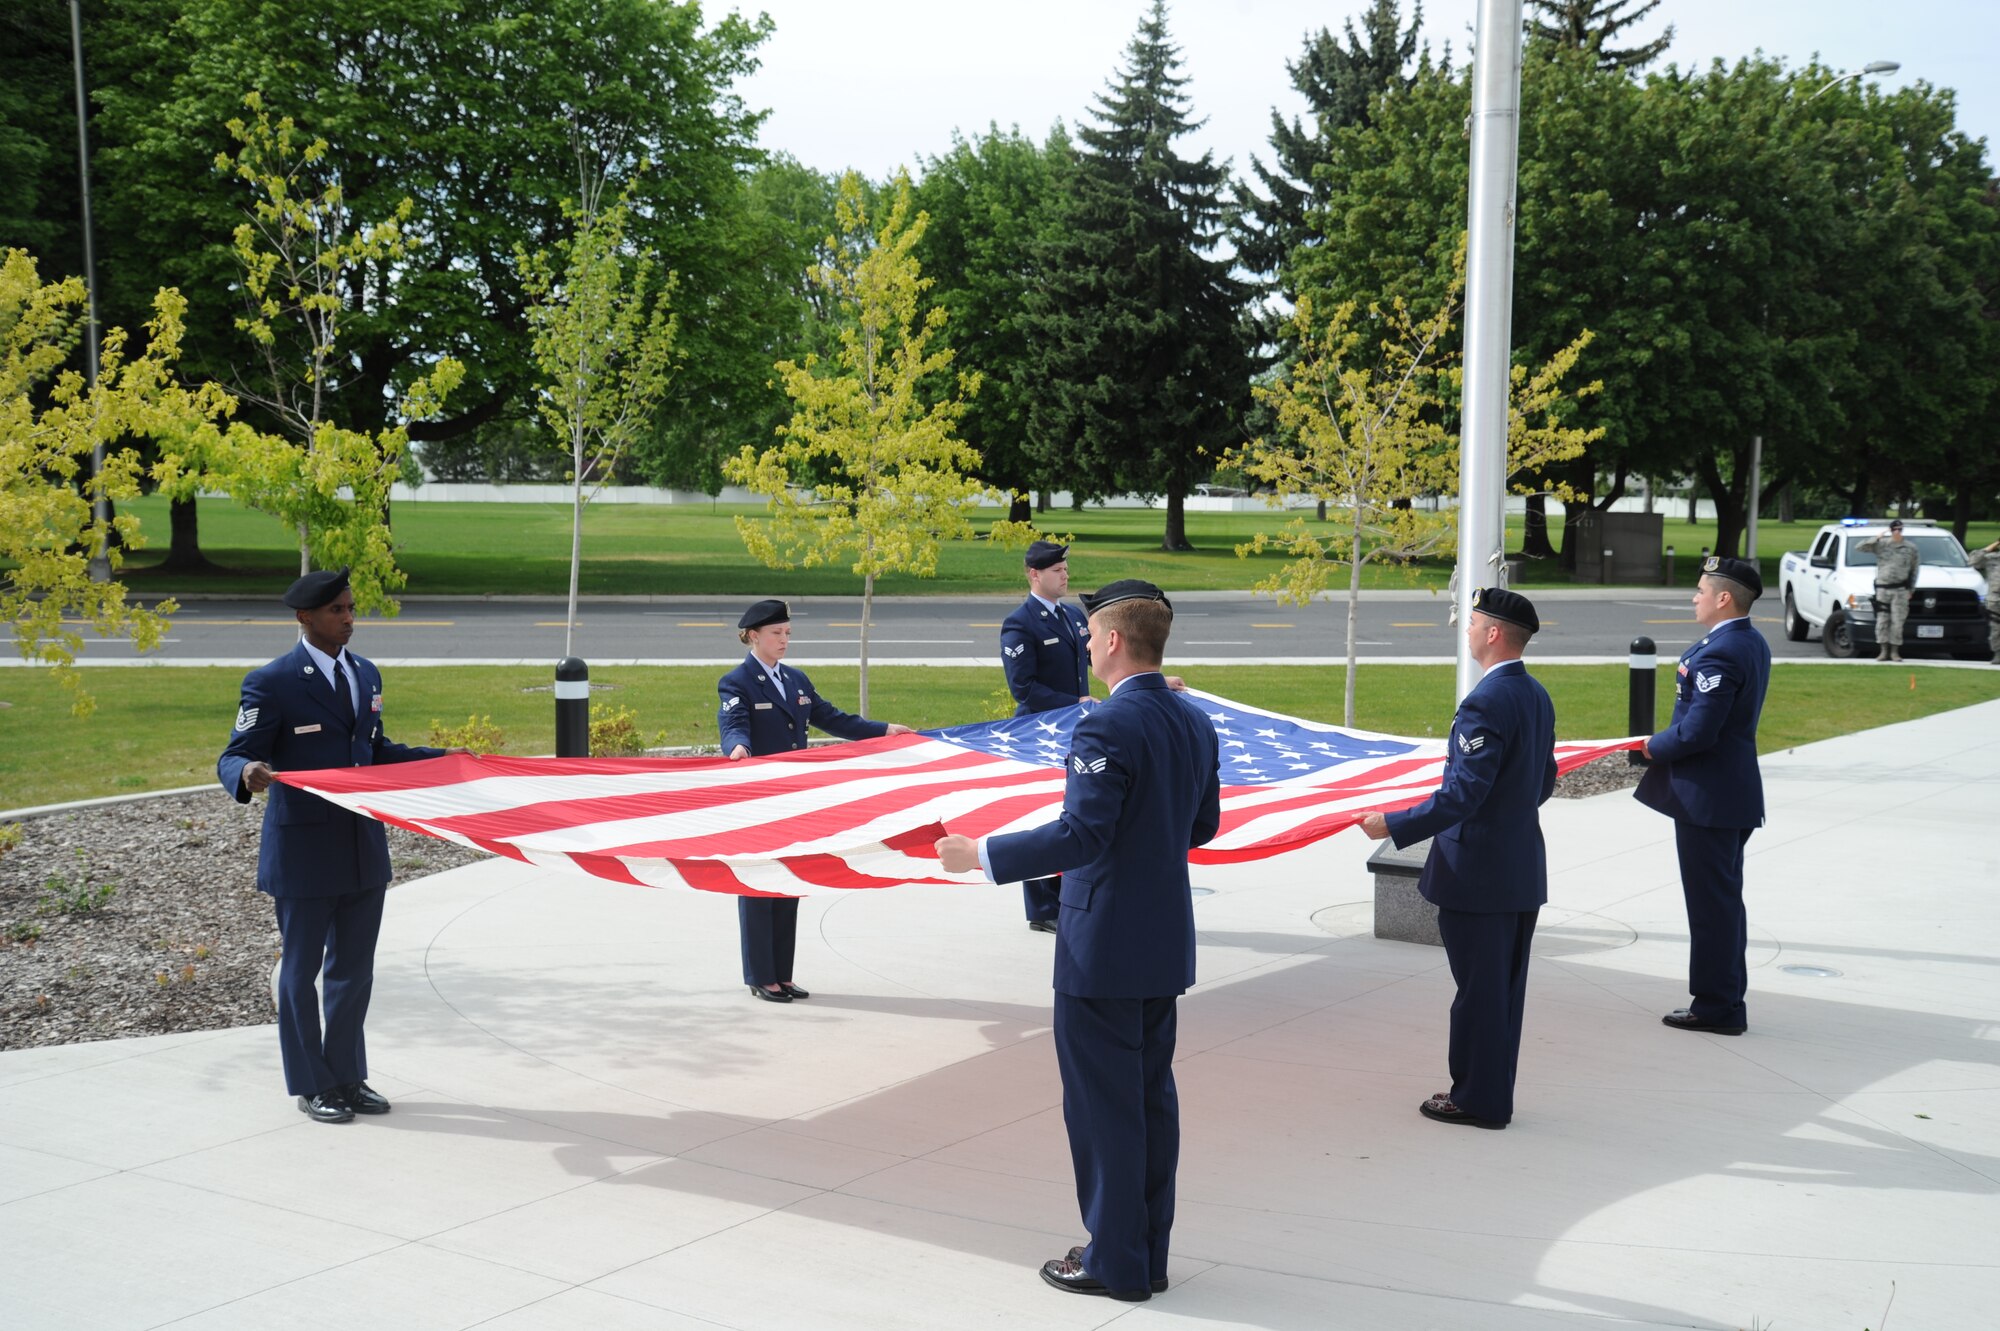 Members from the 92nd Security Forces Squadron hold the American Flag during the retreat ceremony May 15, 2015, at Fairchild Air Force Base, Wash. Established by a joint resolution of Congress in 1962, National Police Week pays special recognition to those law enforcement officers who have lost their lives in the line of duty for the safety and protection of others. (U.S. Air Force photo/Airman 1st Class Nicolo J. Daniello)